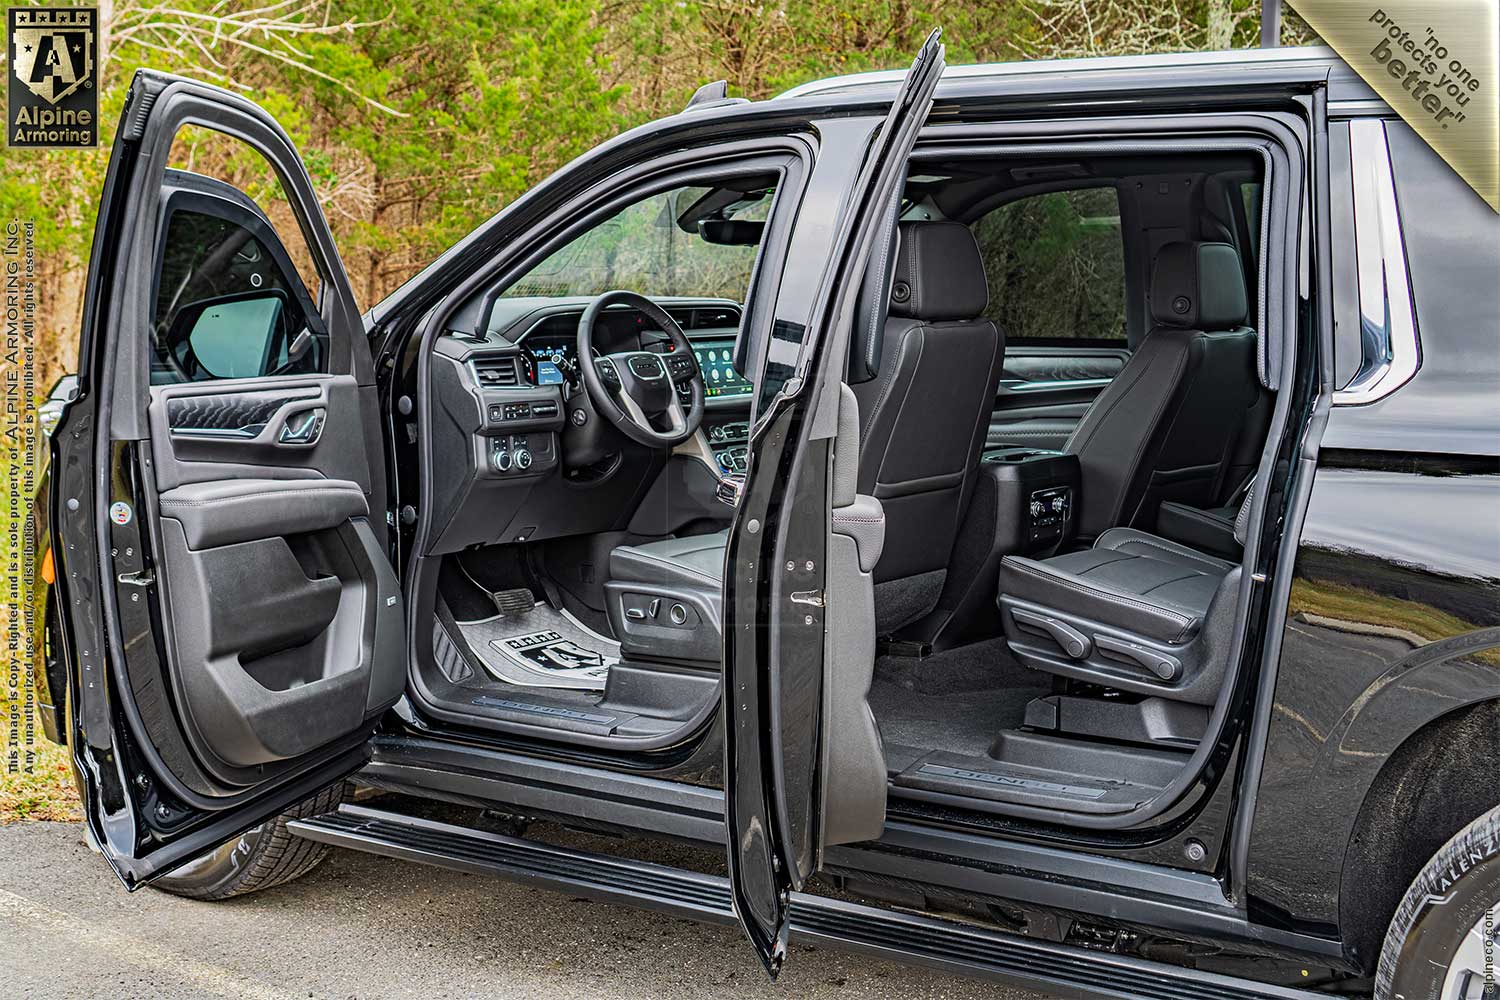 New Inventory armored GMC Yukon 4WD Denali Level A9/B6+ Exterior & Interior Images VIN:9835